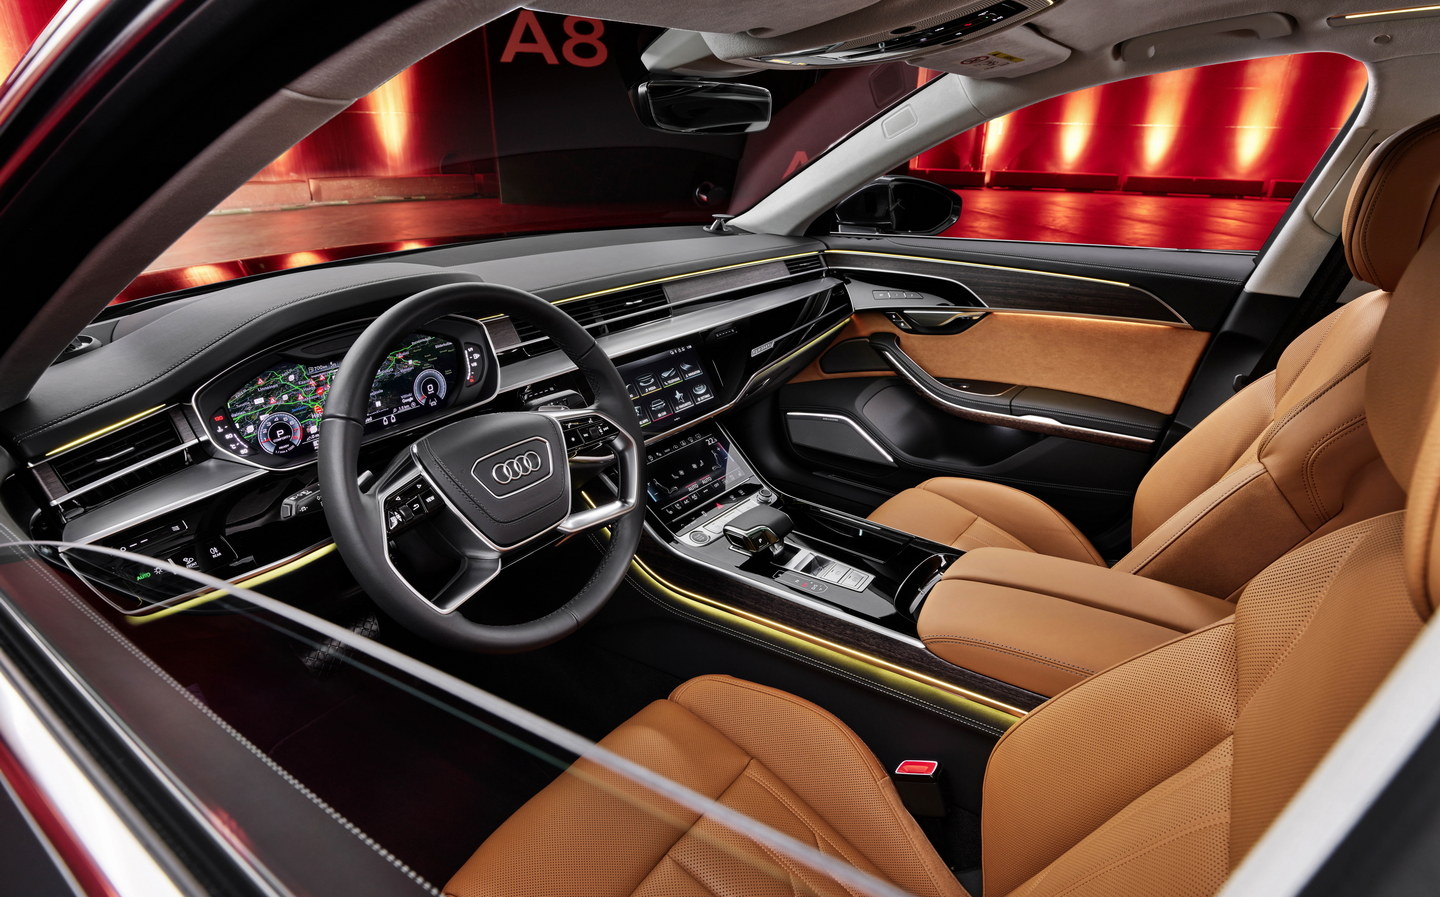 Audi reveals updated A8 luxury car with new tech and hybrid power